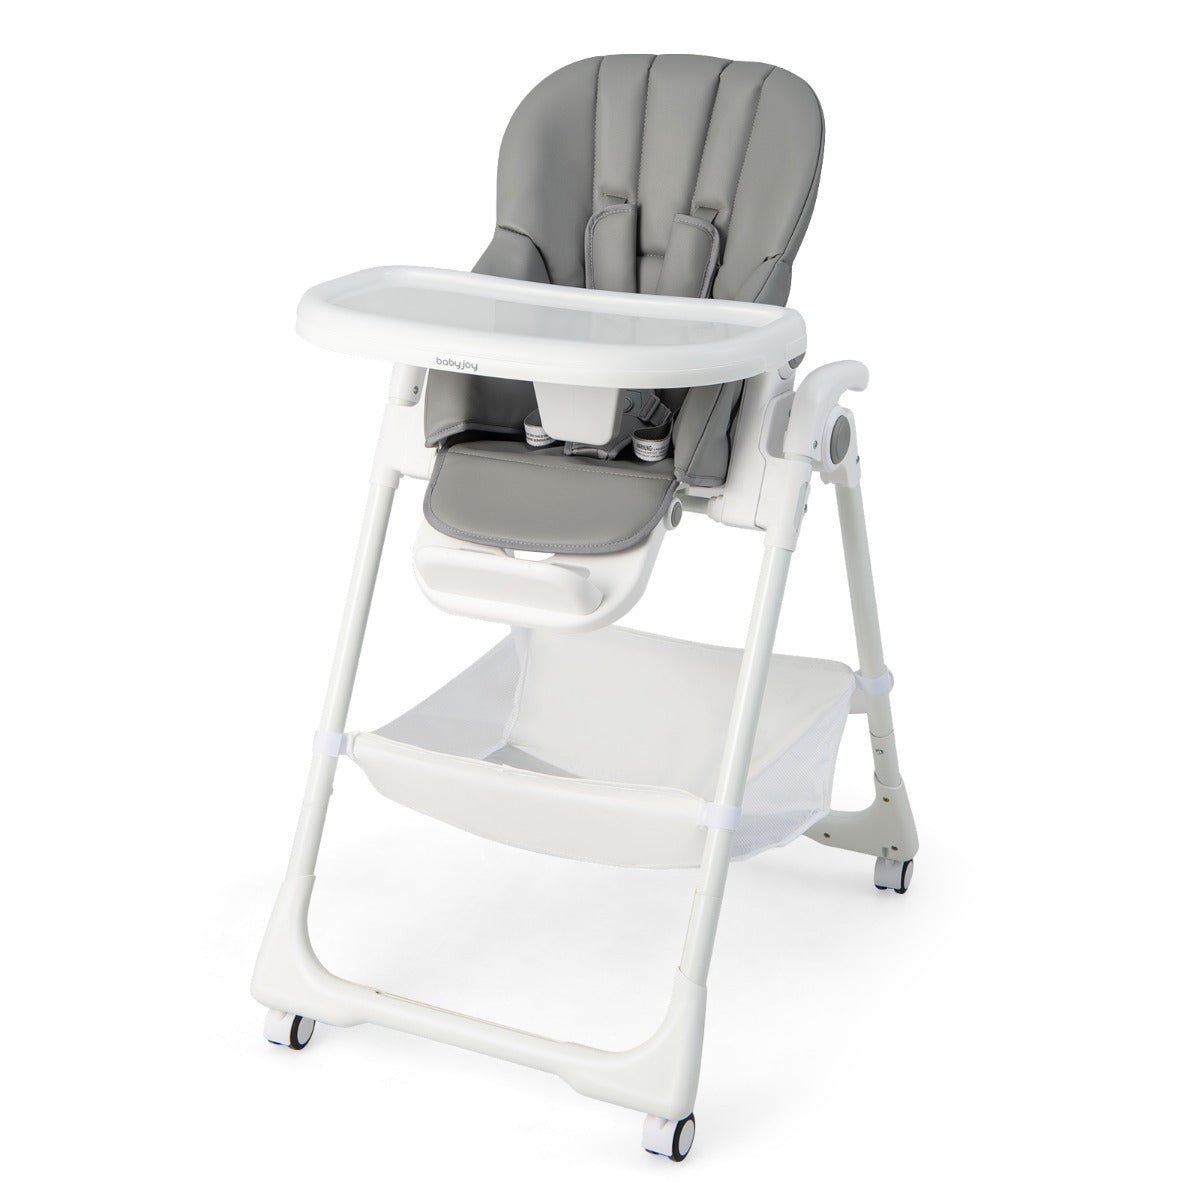 Shop Now - Grey Infant High Chair